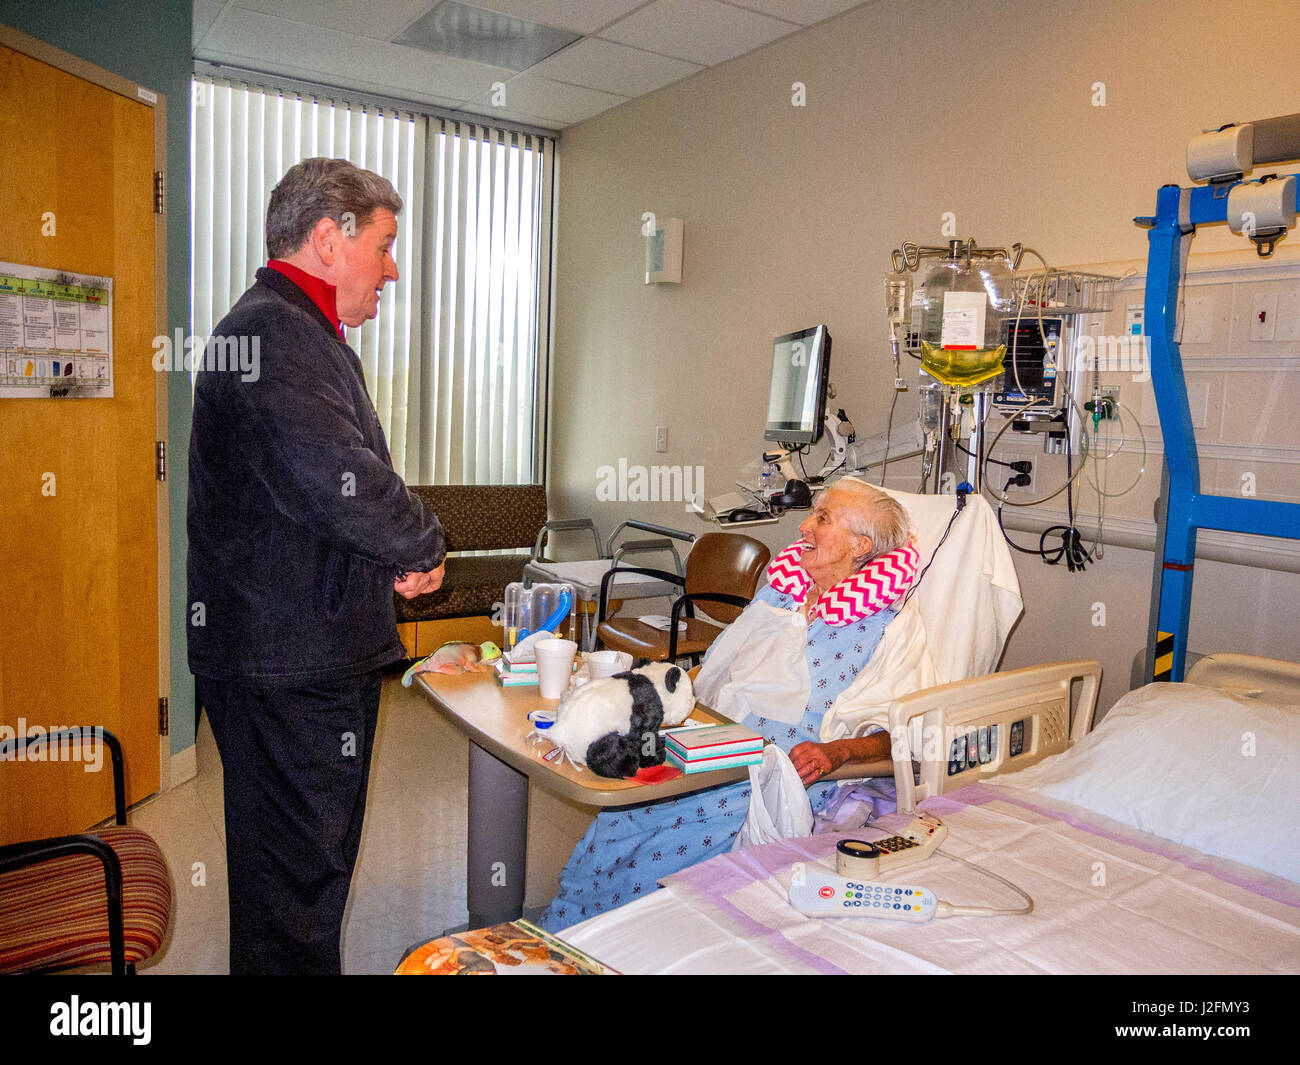 A Catholic priest pays an encouraging visit to a senior woman patient in bed at an Irvine, CA, hospital. Note cervical collar. Stock Photo